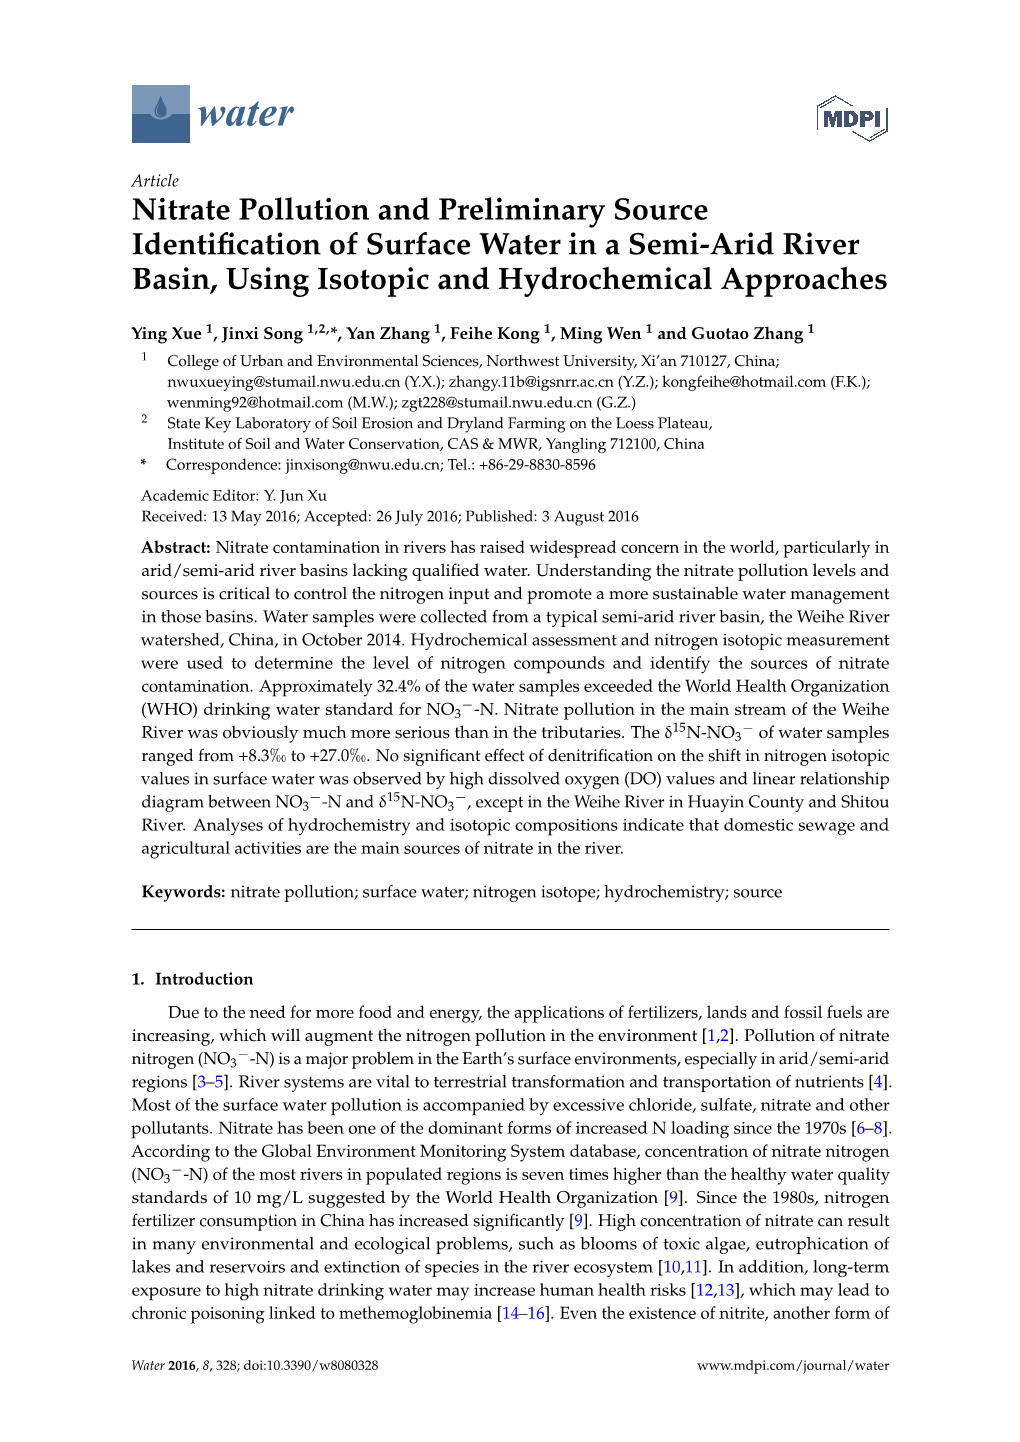 Nitrate Pollution and Preliminary Source Identification of Surface